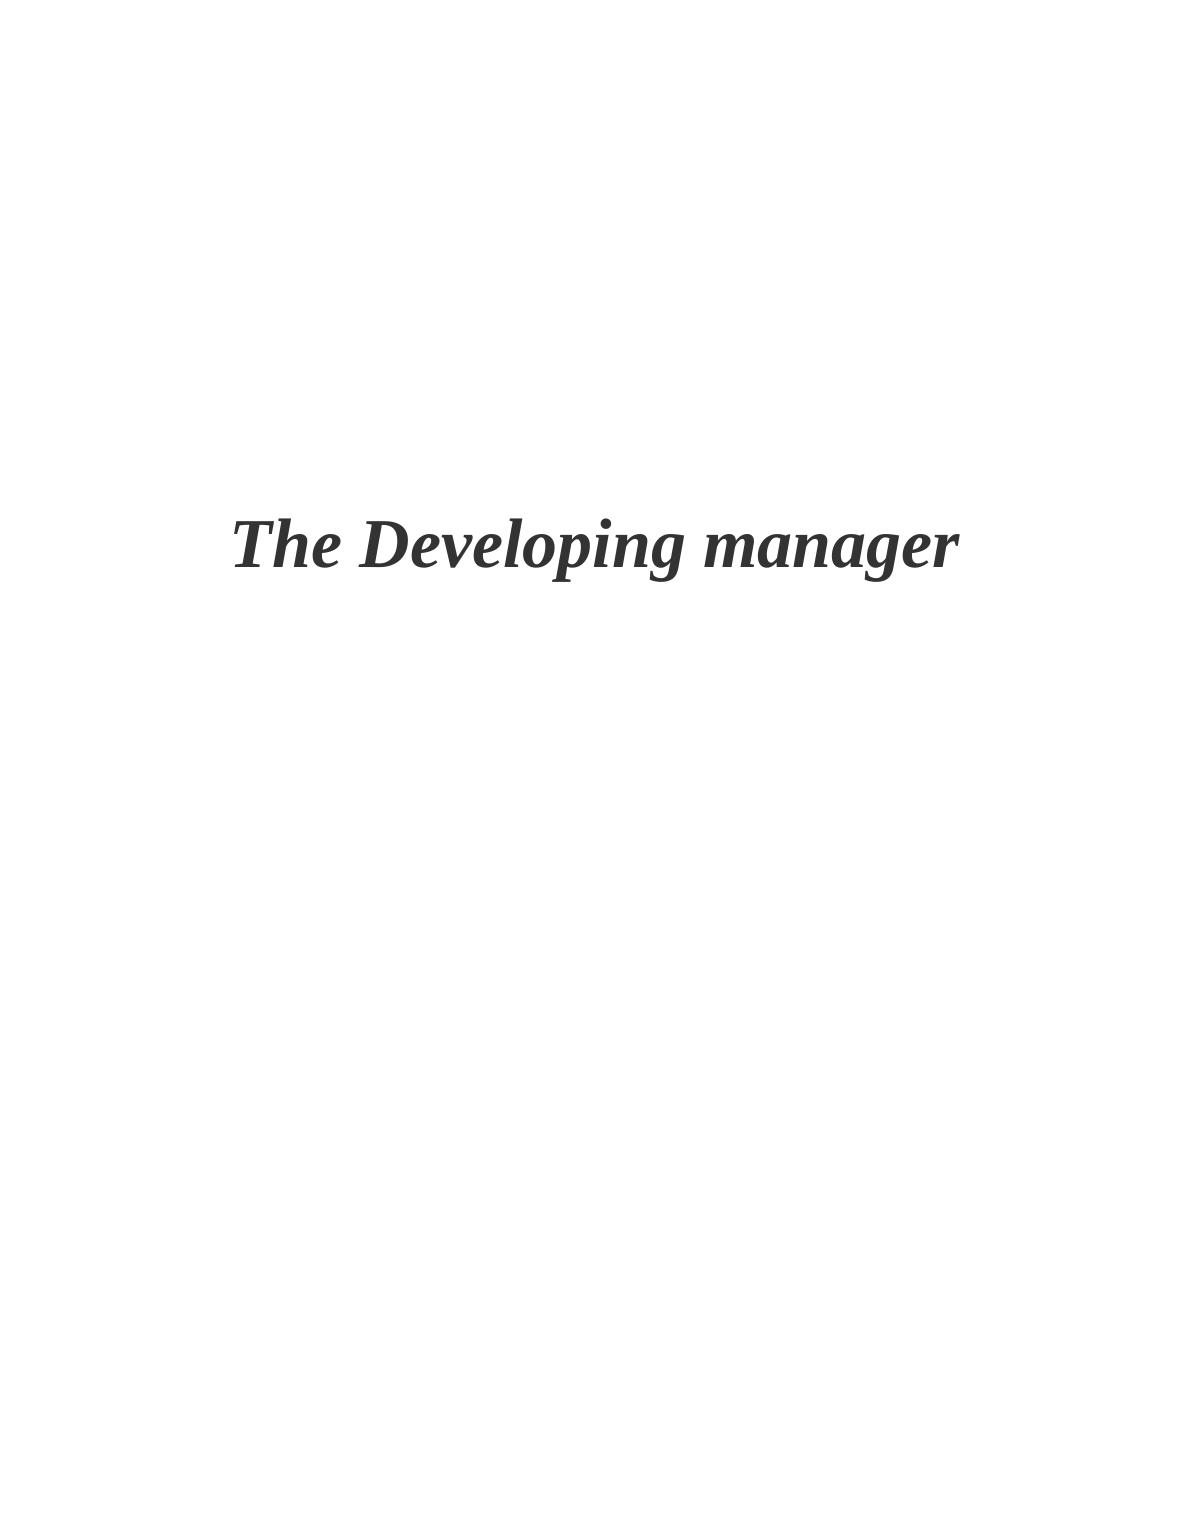 The Role of the Development Manager (Doc)_1